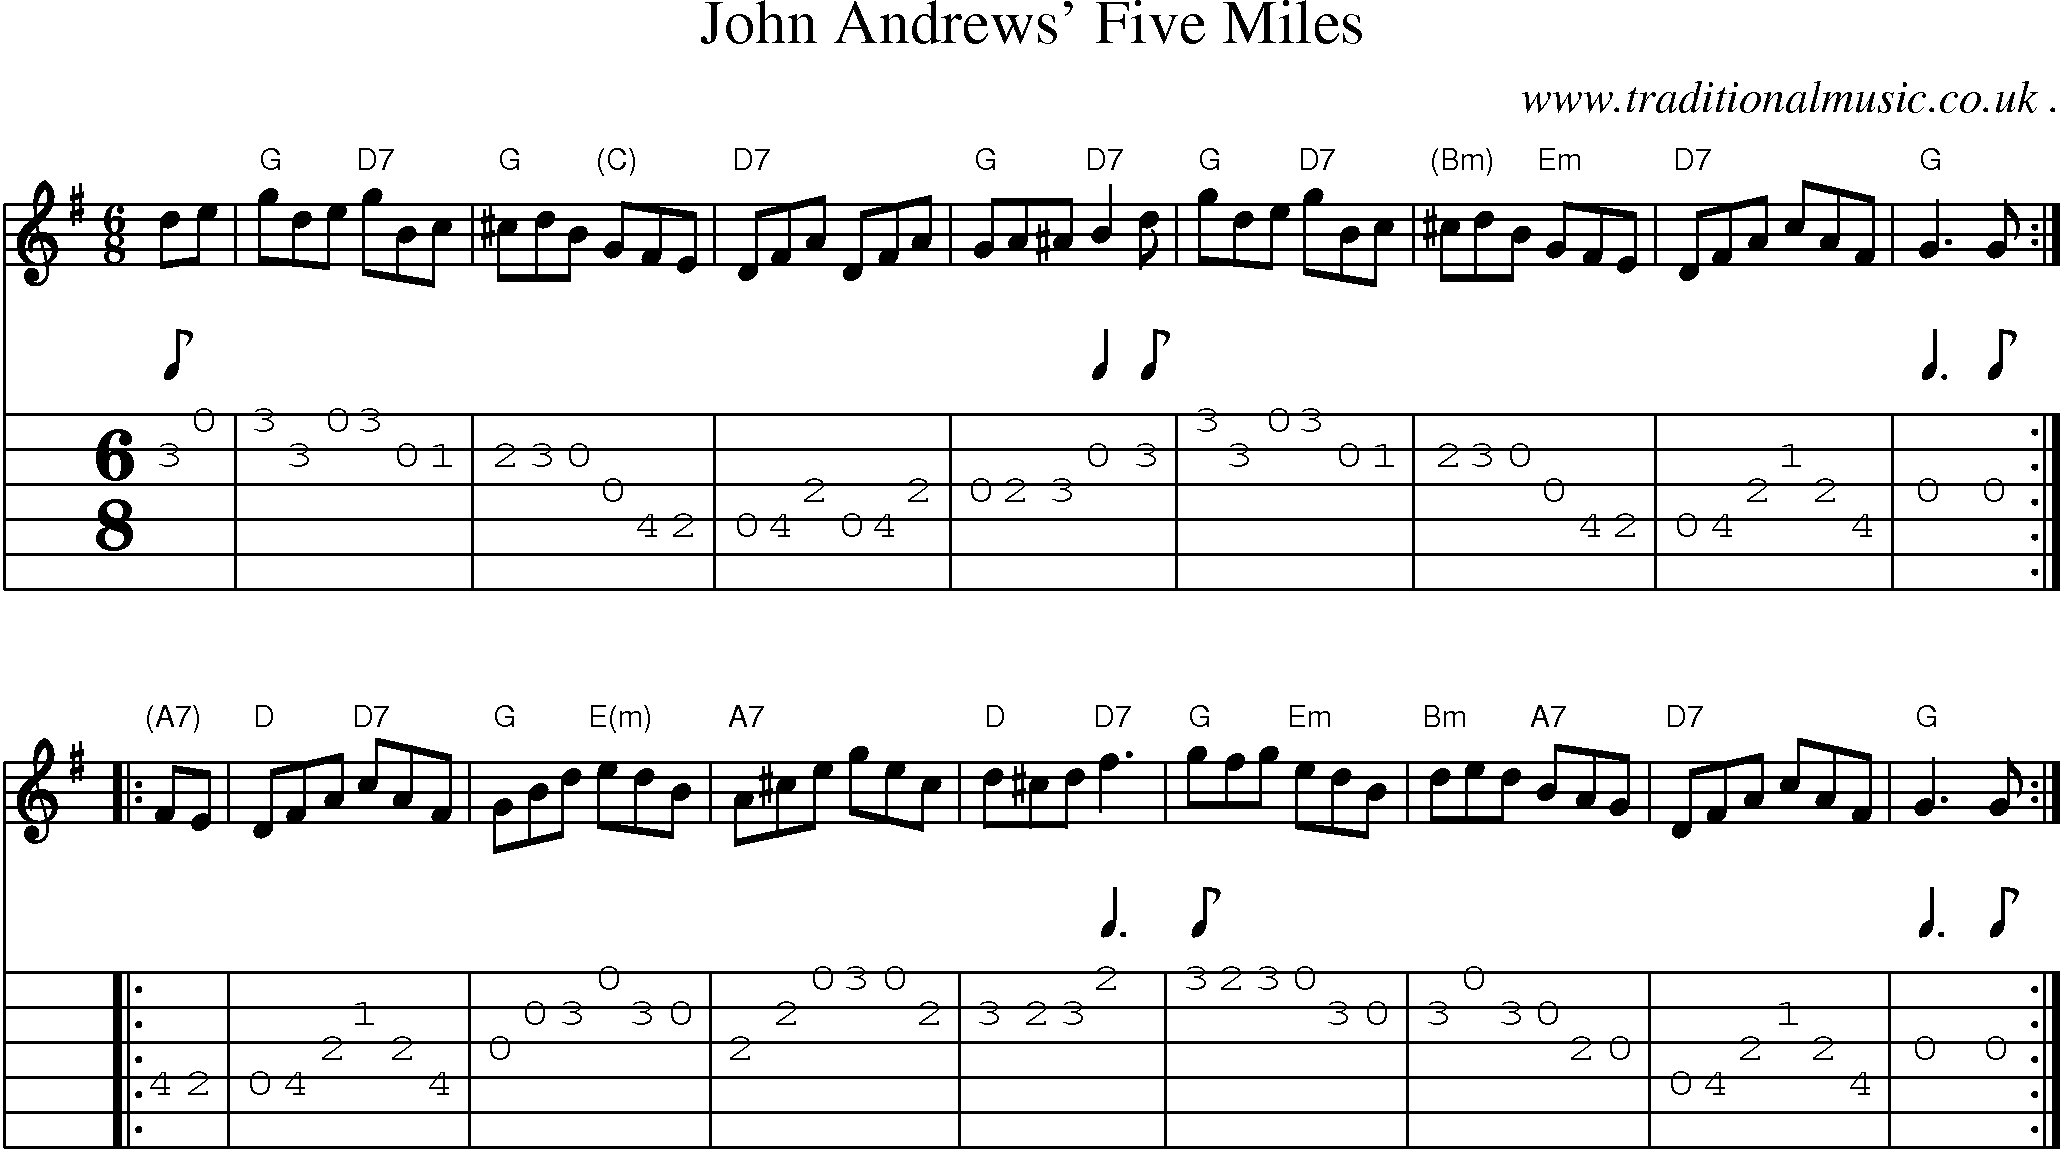 Sheet-music  score, Chords and Guitar Tabs for John Andrews Five Miles